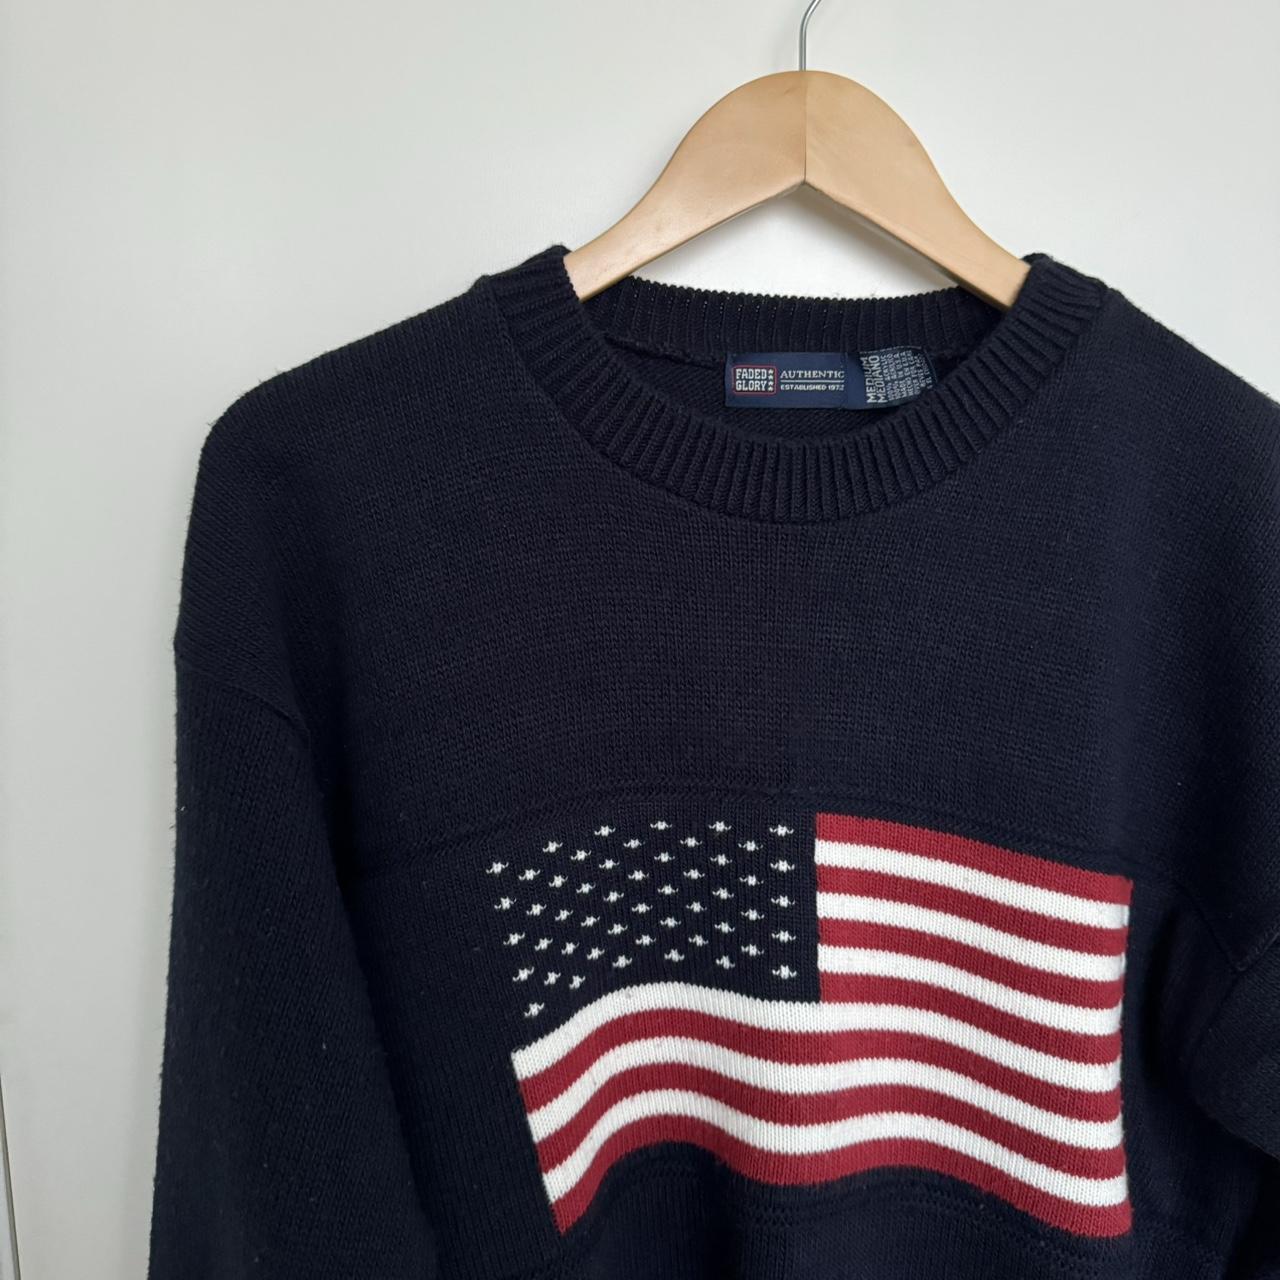 vintage american flag sweater - size m - made in... - Depop